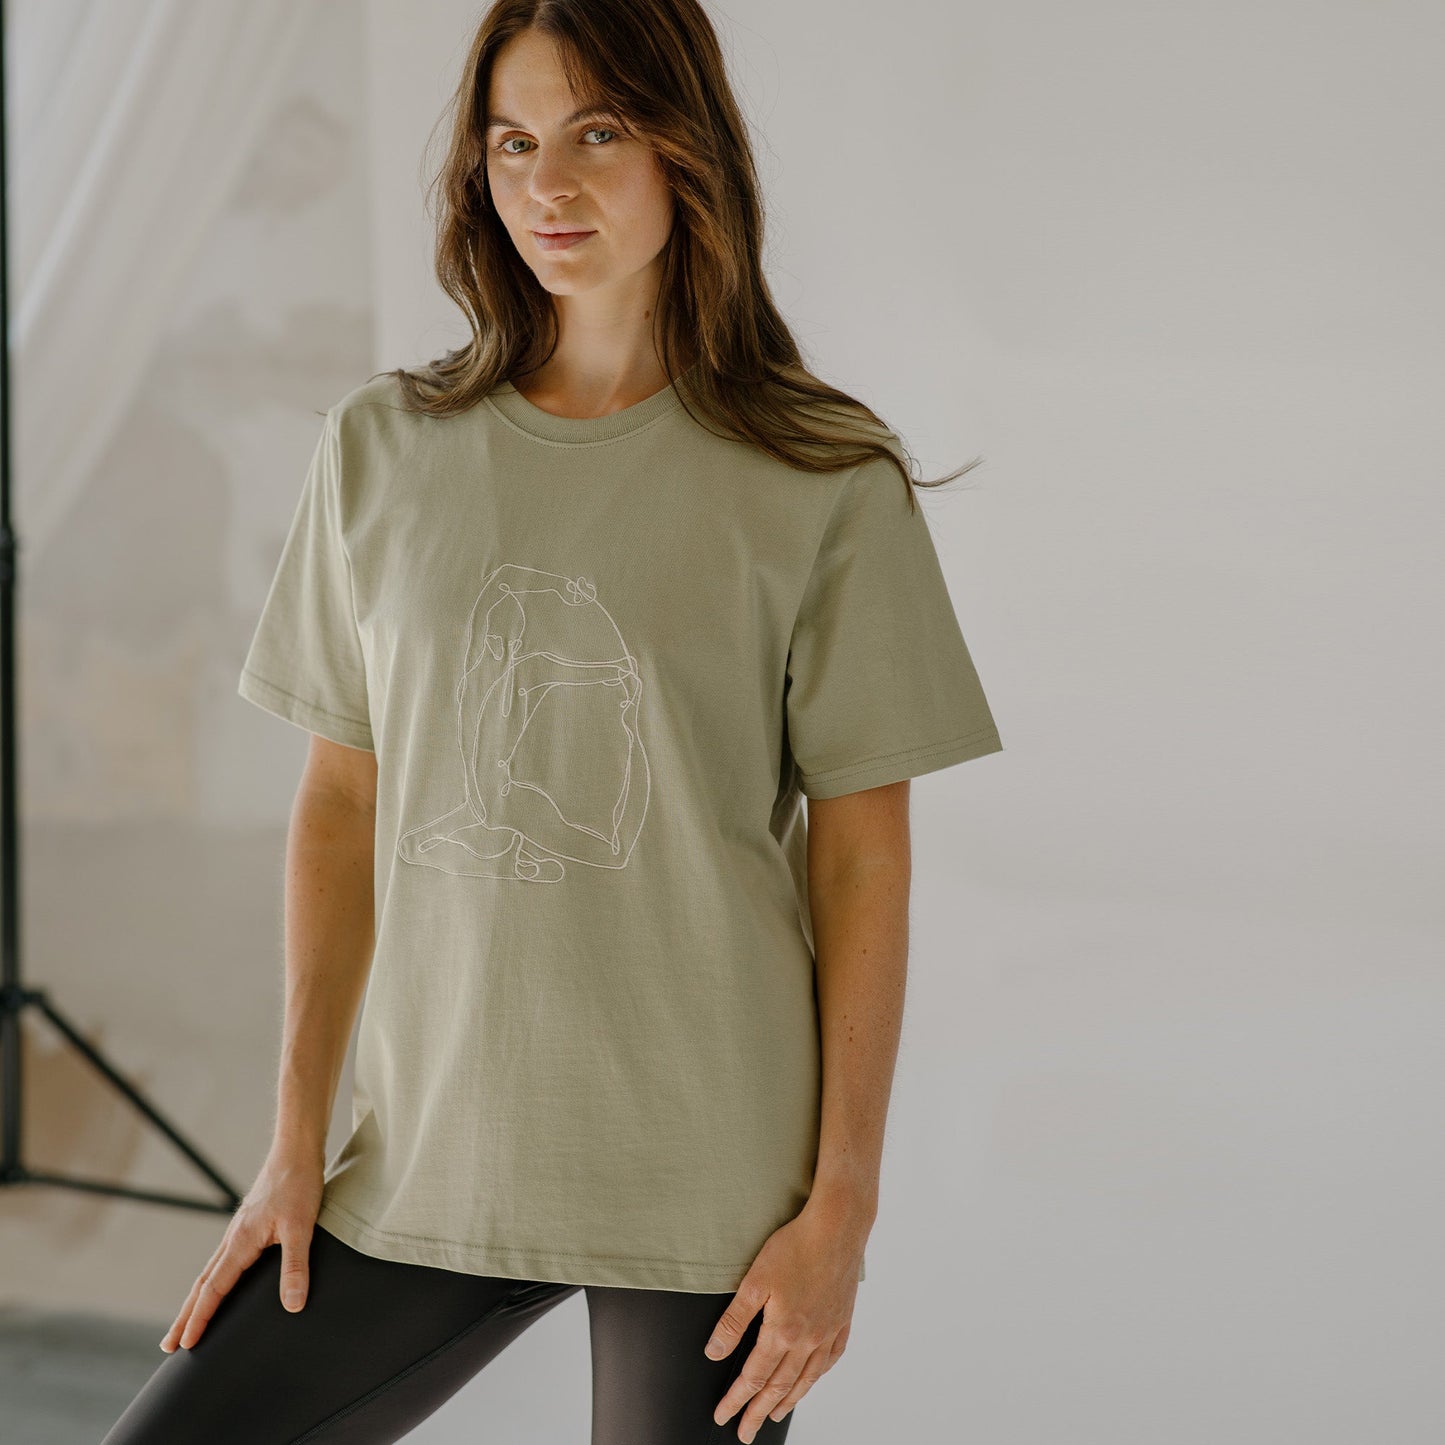 Mermaid Embroidered Sage Organic Cotton T-shirt - Actively Conscious